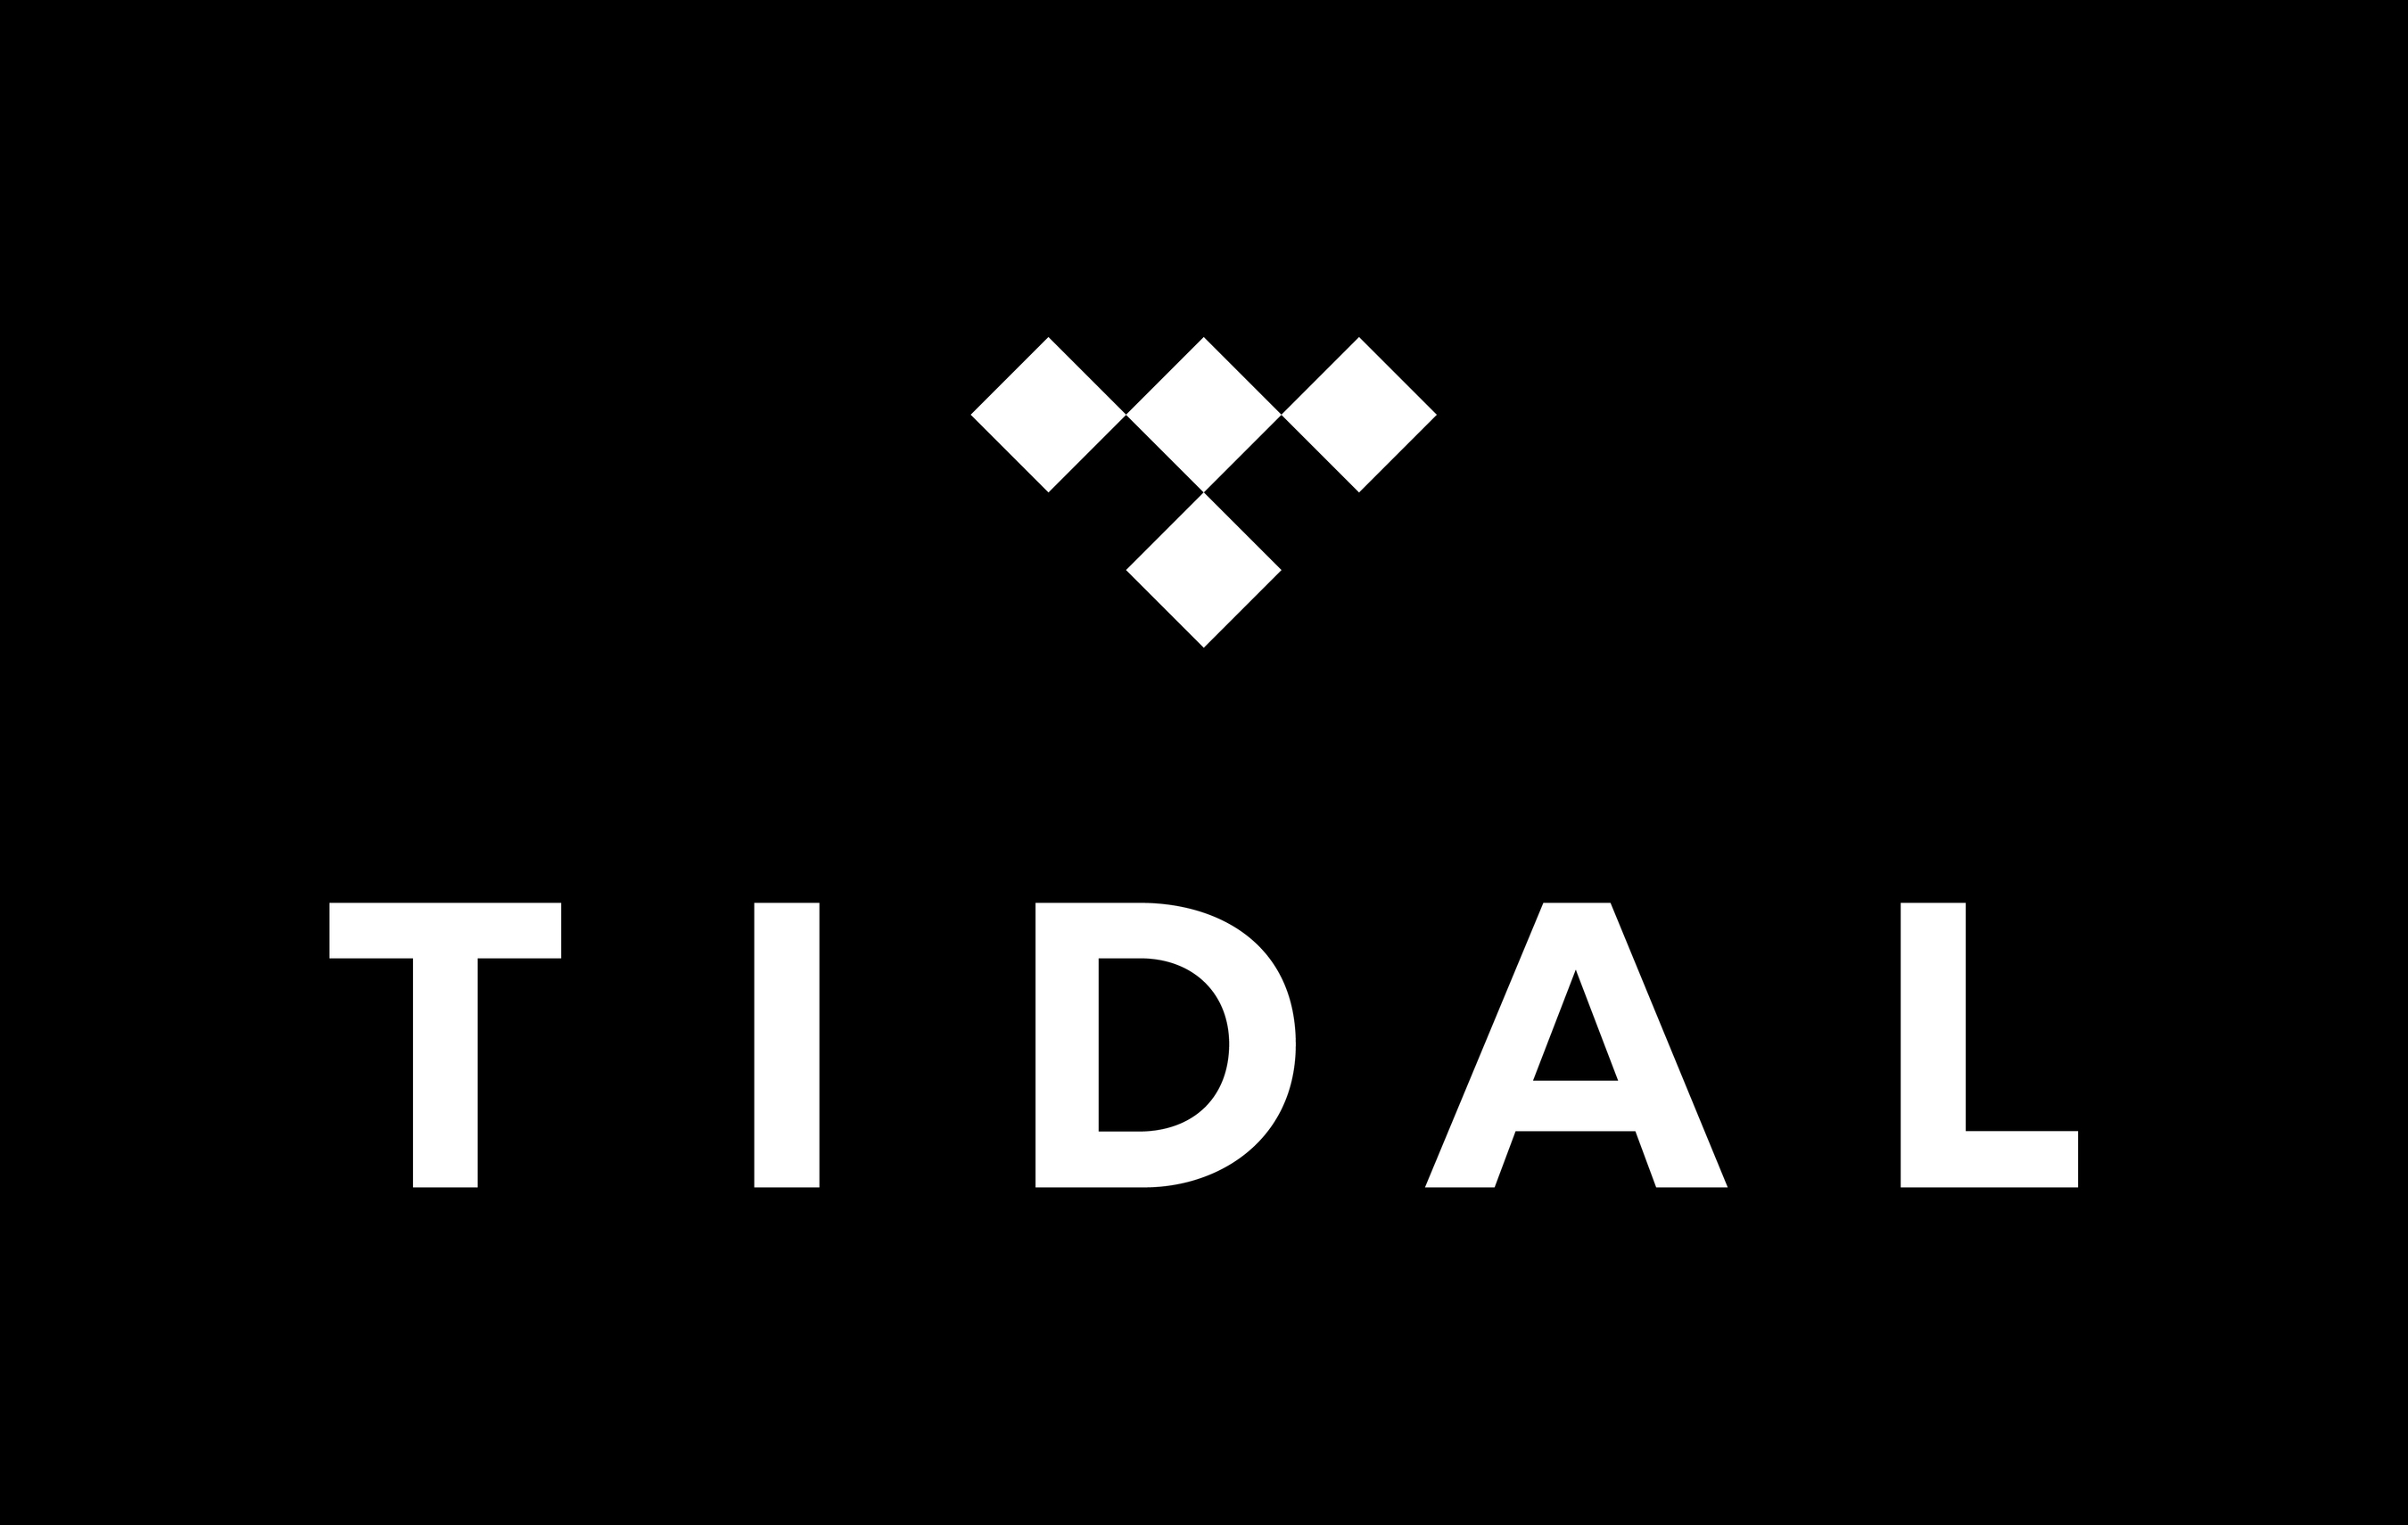 How to learn about music history with TIDAL